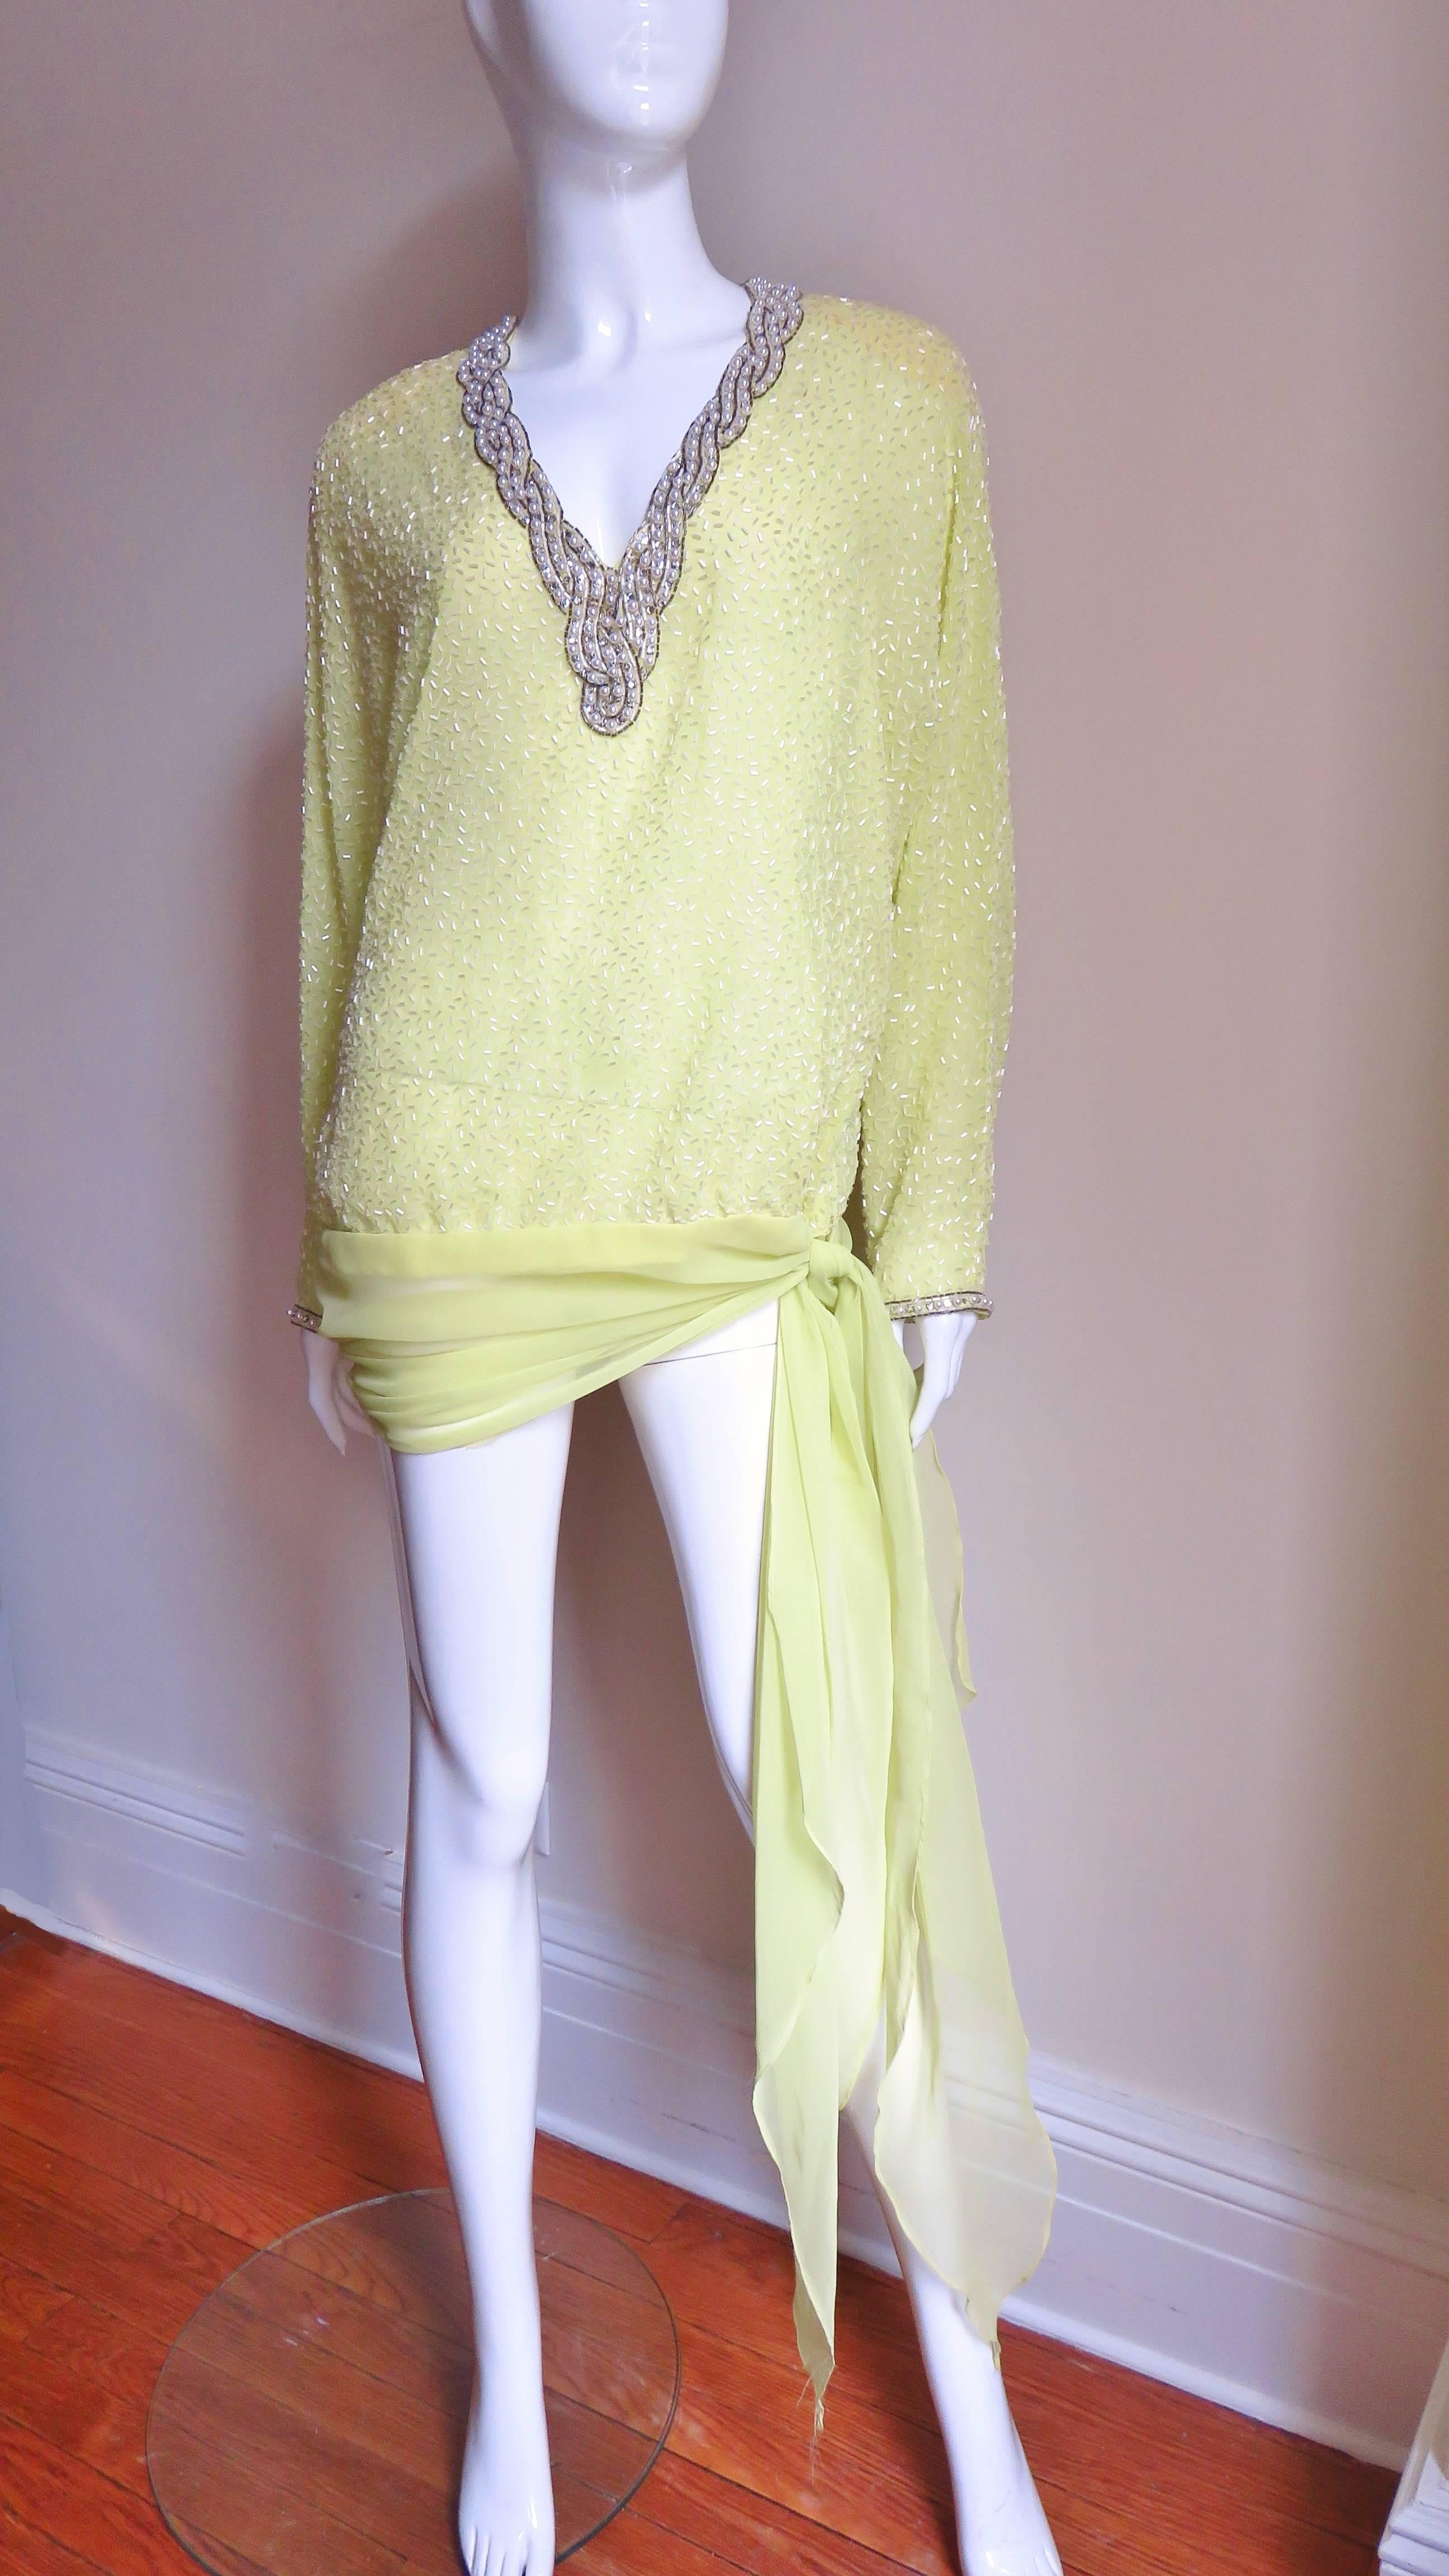 A pretty semi sheer lemon colored top by Royal Victoria in British Hong Kong from an era and part of the world know for bead work.  It has a deep V neckline, long dolman sleeves with zipper cuffs and a wide sheer swath of  sheer fabric gathering and